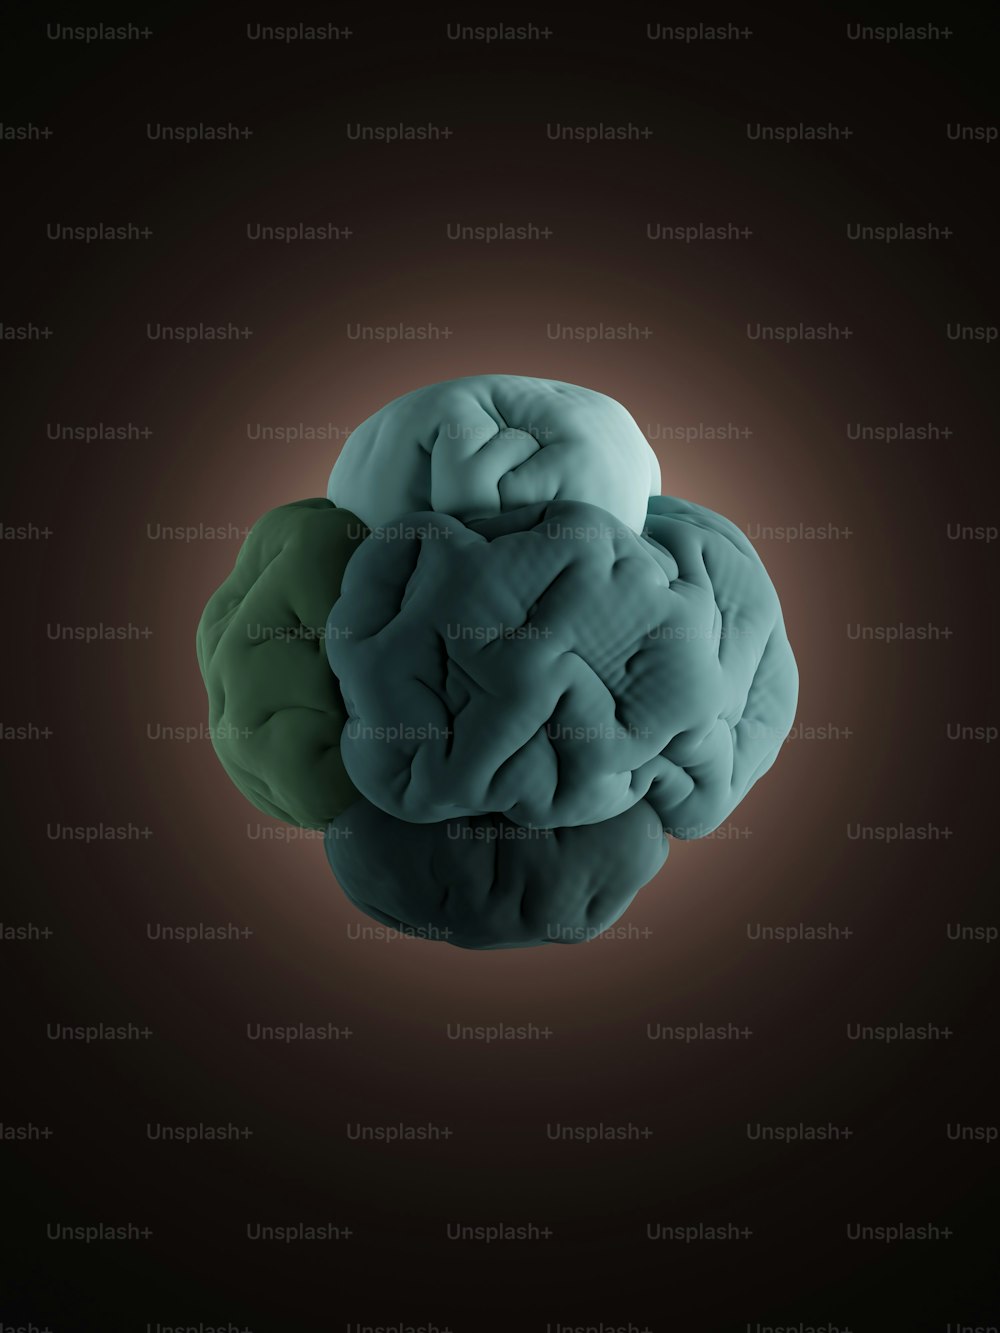 two different colored brain models on a black background